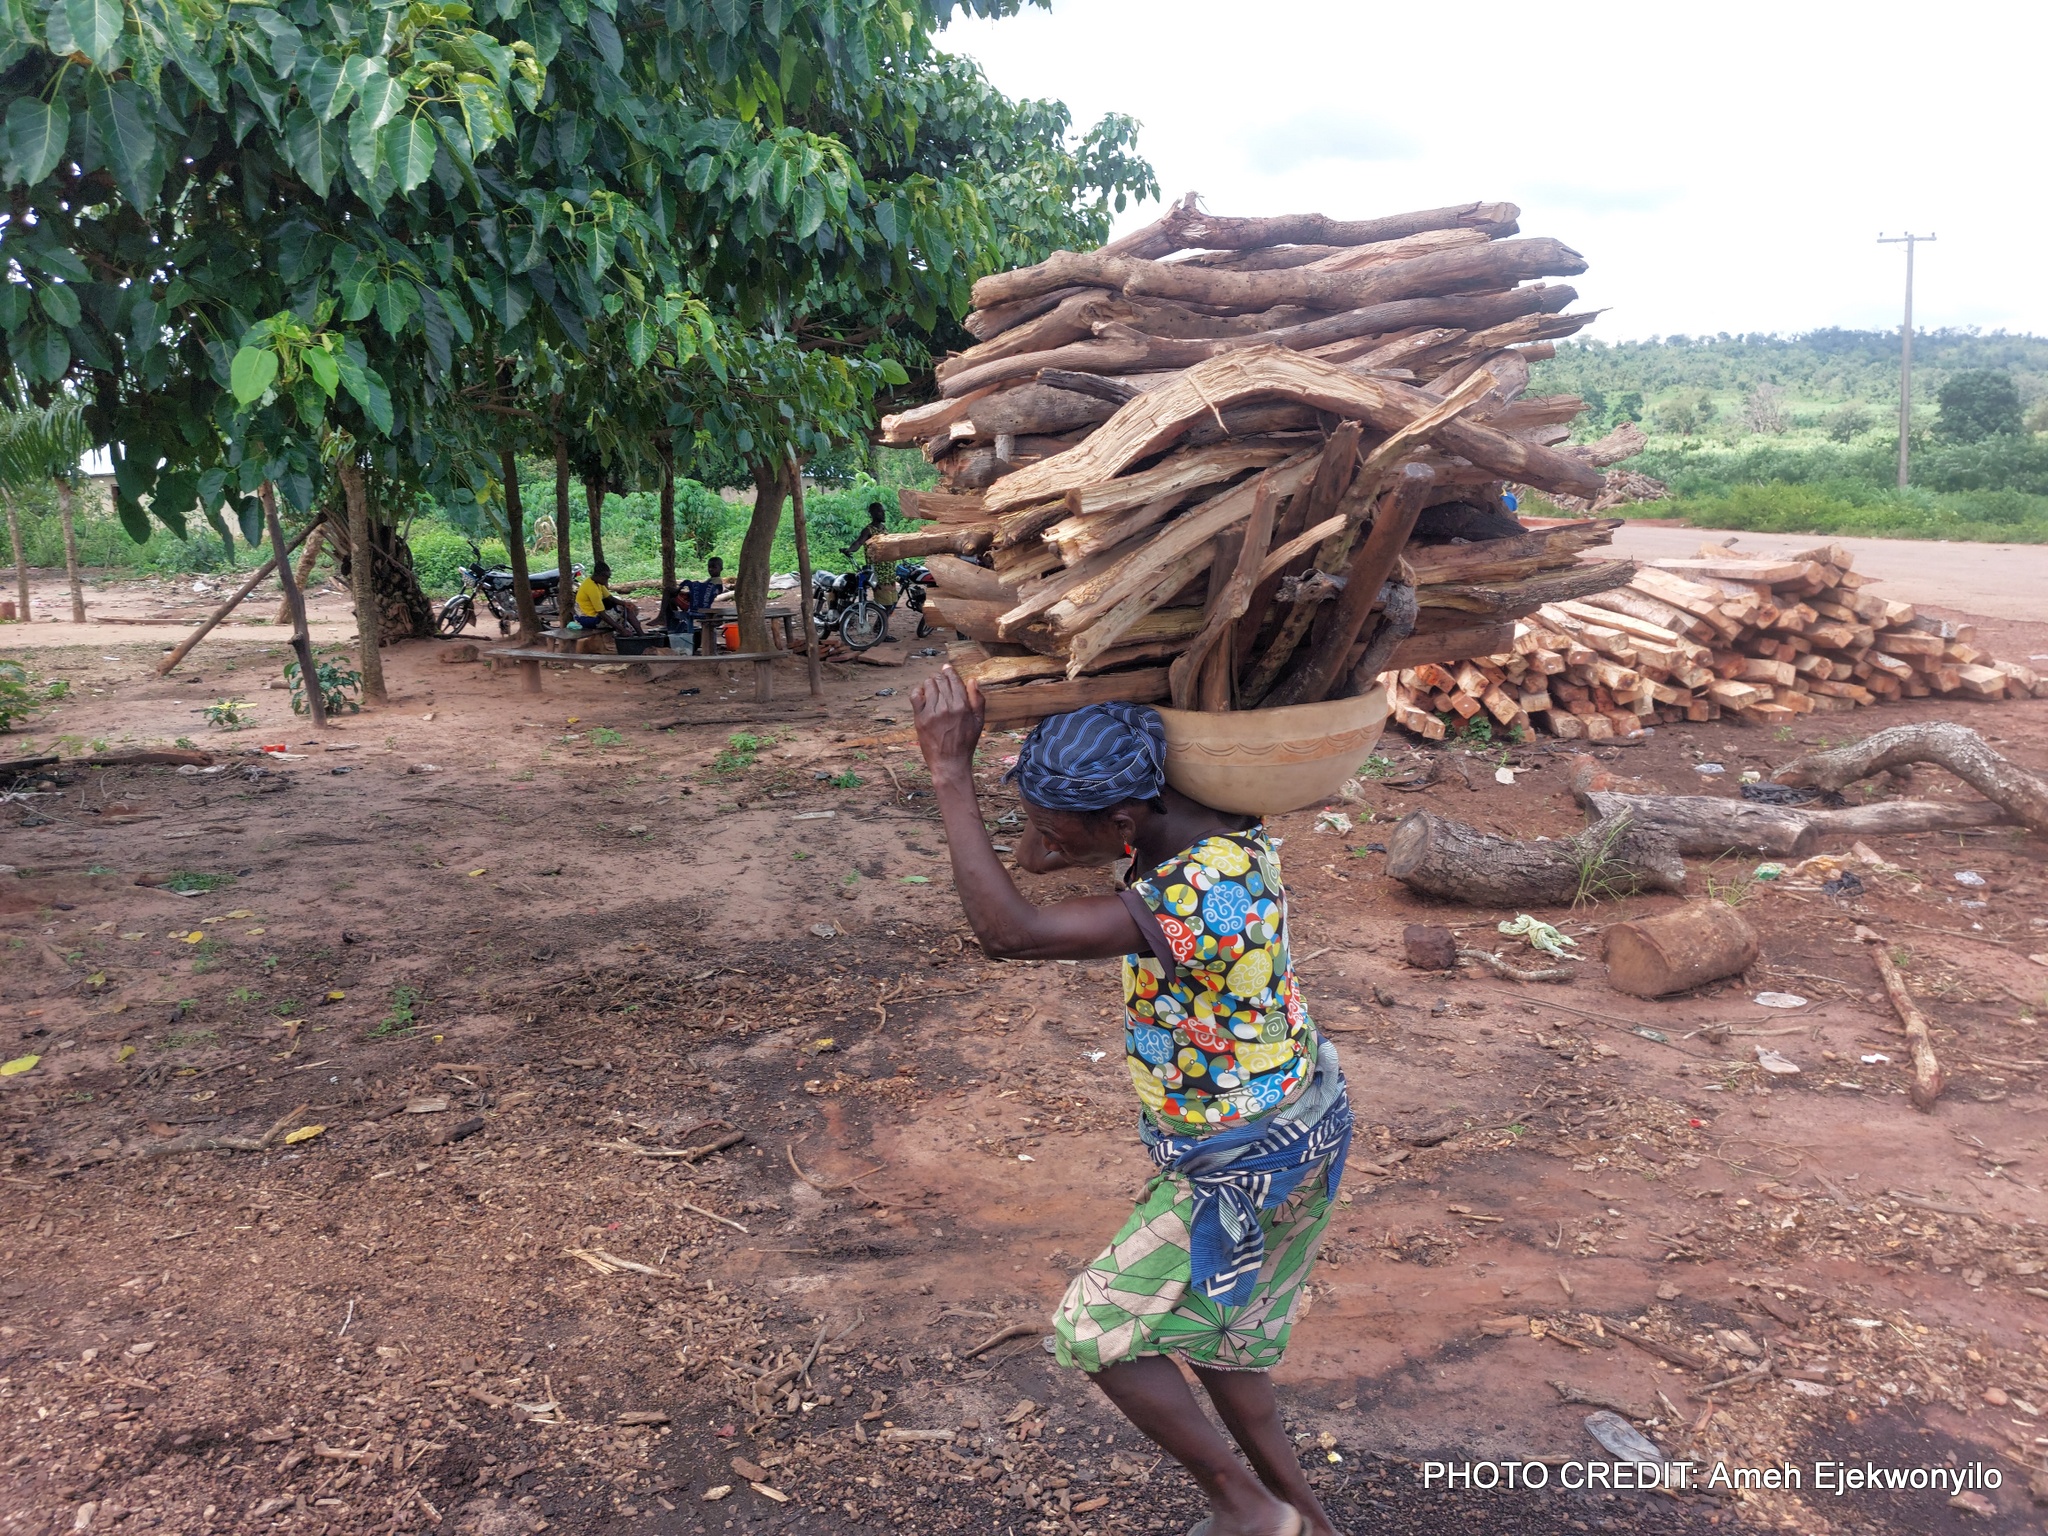 An elderly Gbagyi woman returns from her farm with a stack of firewood on her shoulders at Munu village in Abuja. (Photo Credit: Ameh Ejekwonyilo)